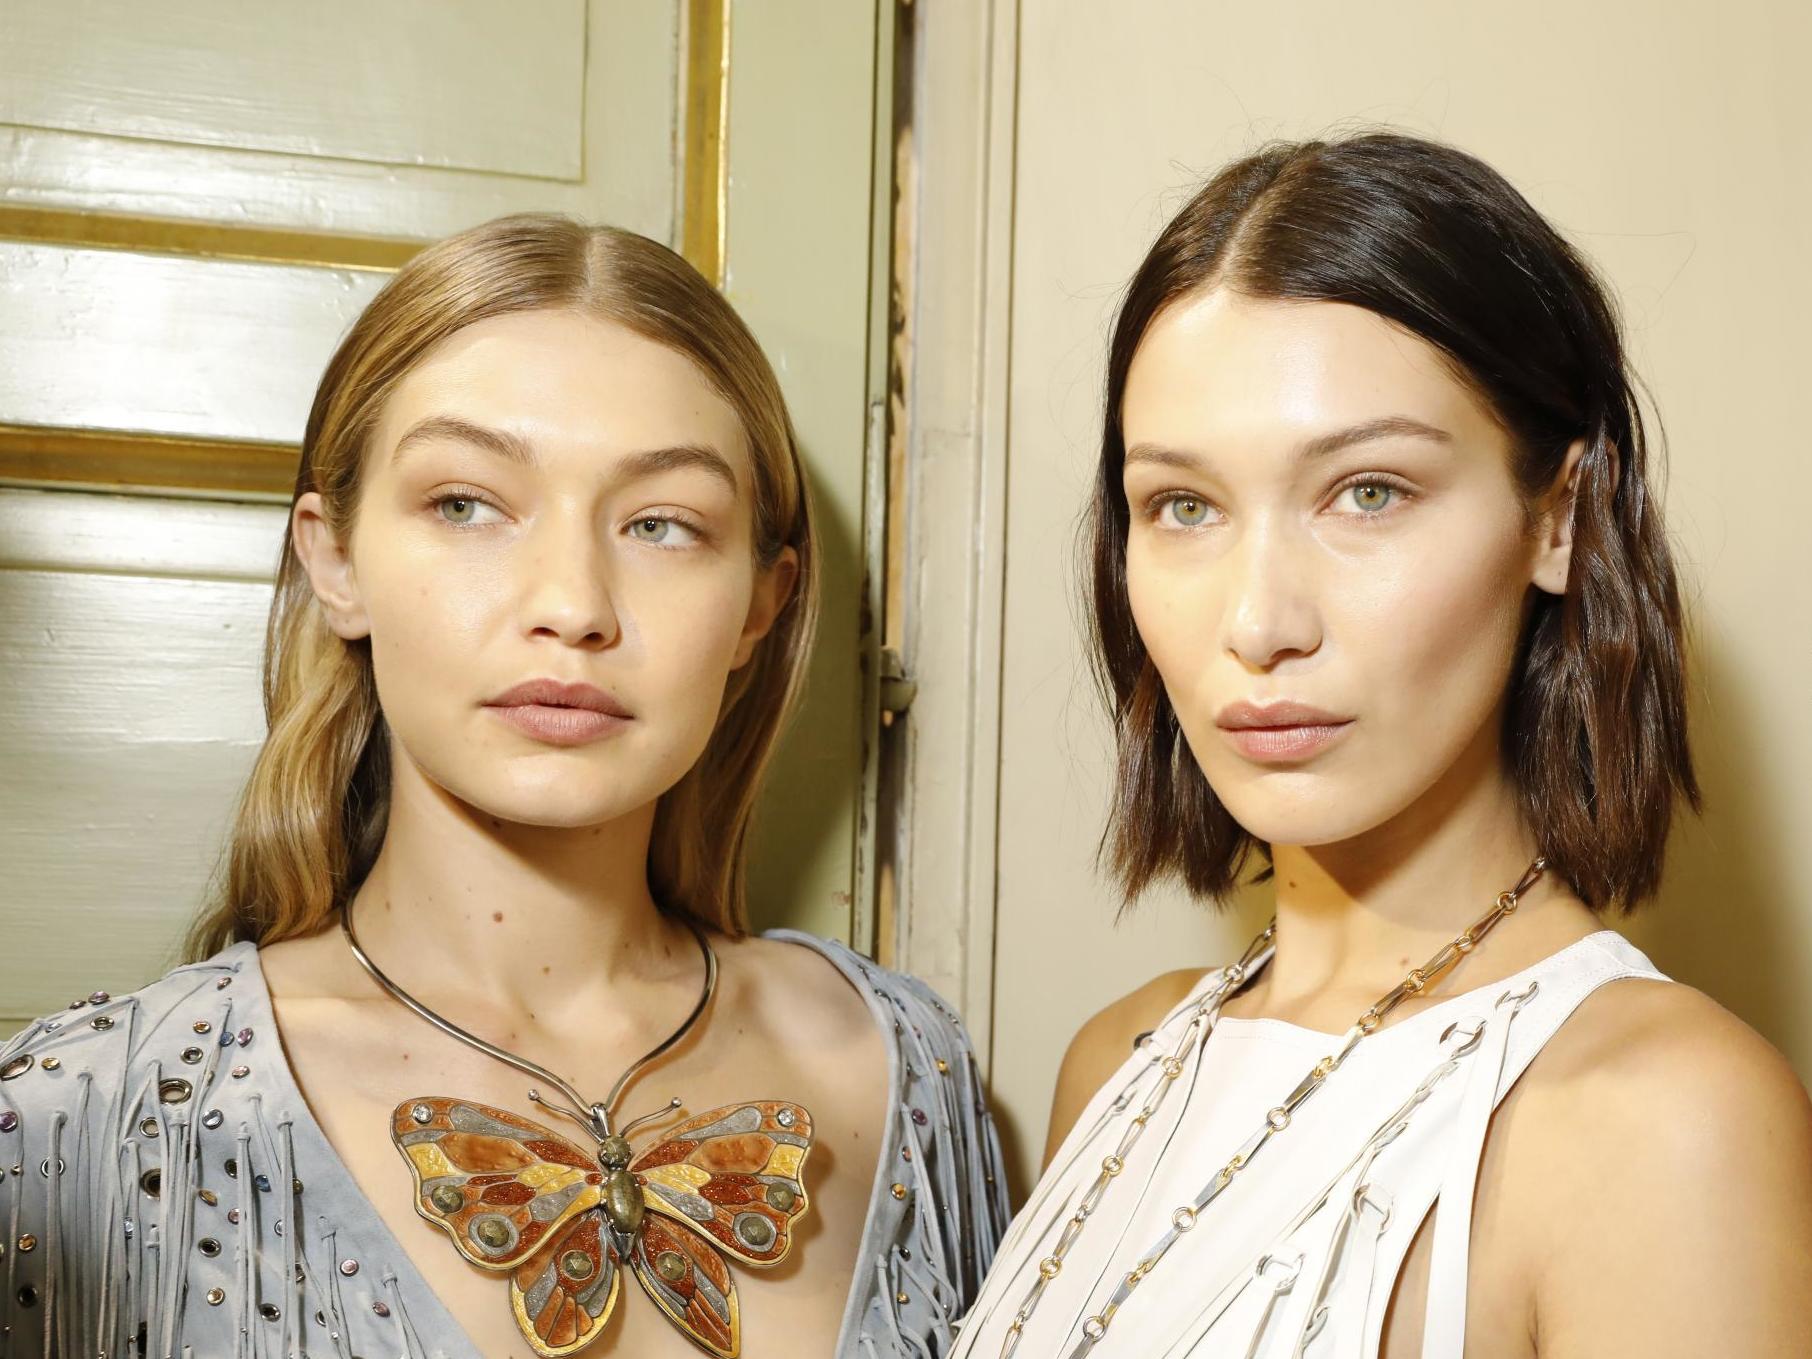 Gigi and Bella Hadid robbed: Models vow to never return to Greek island